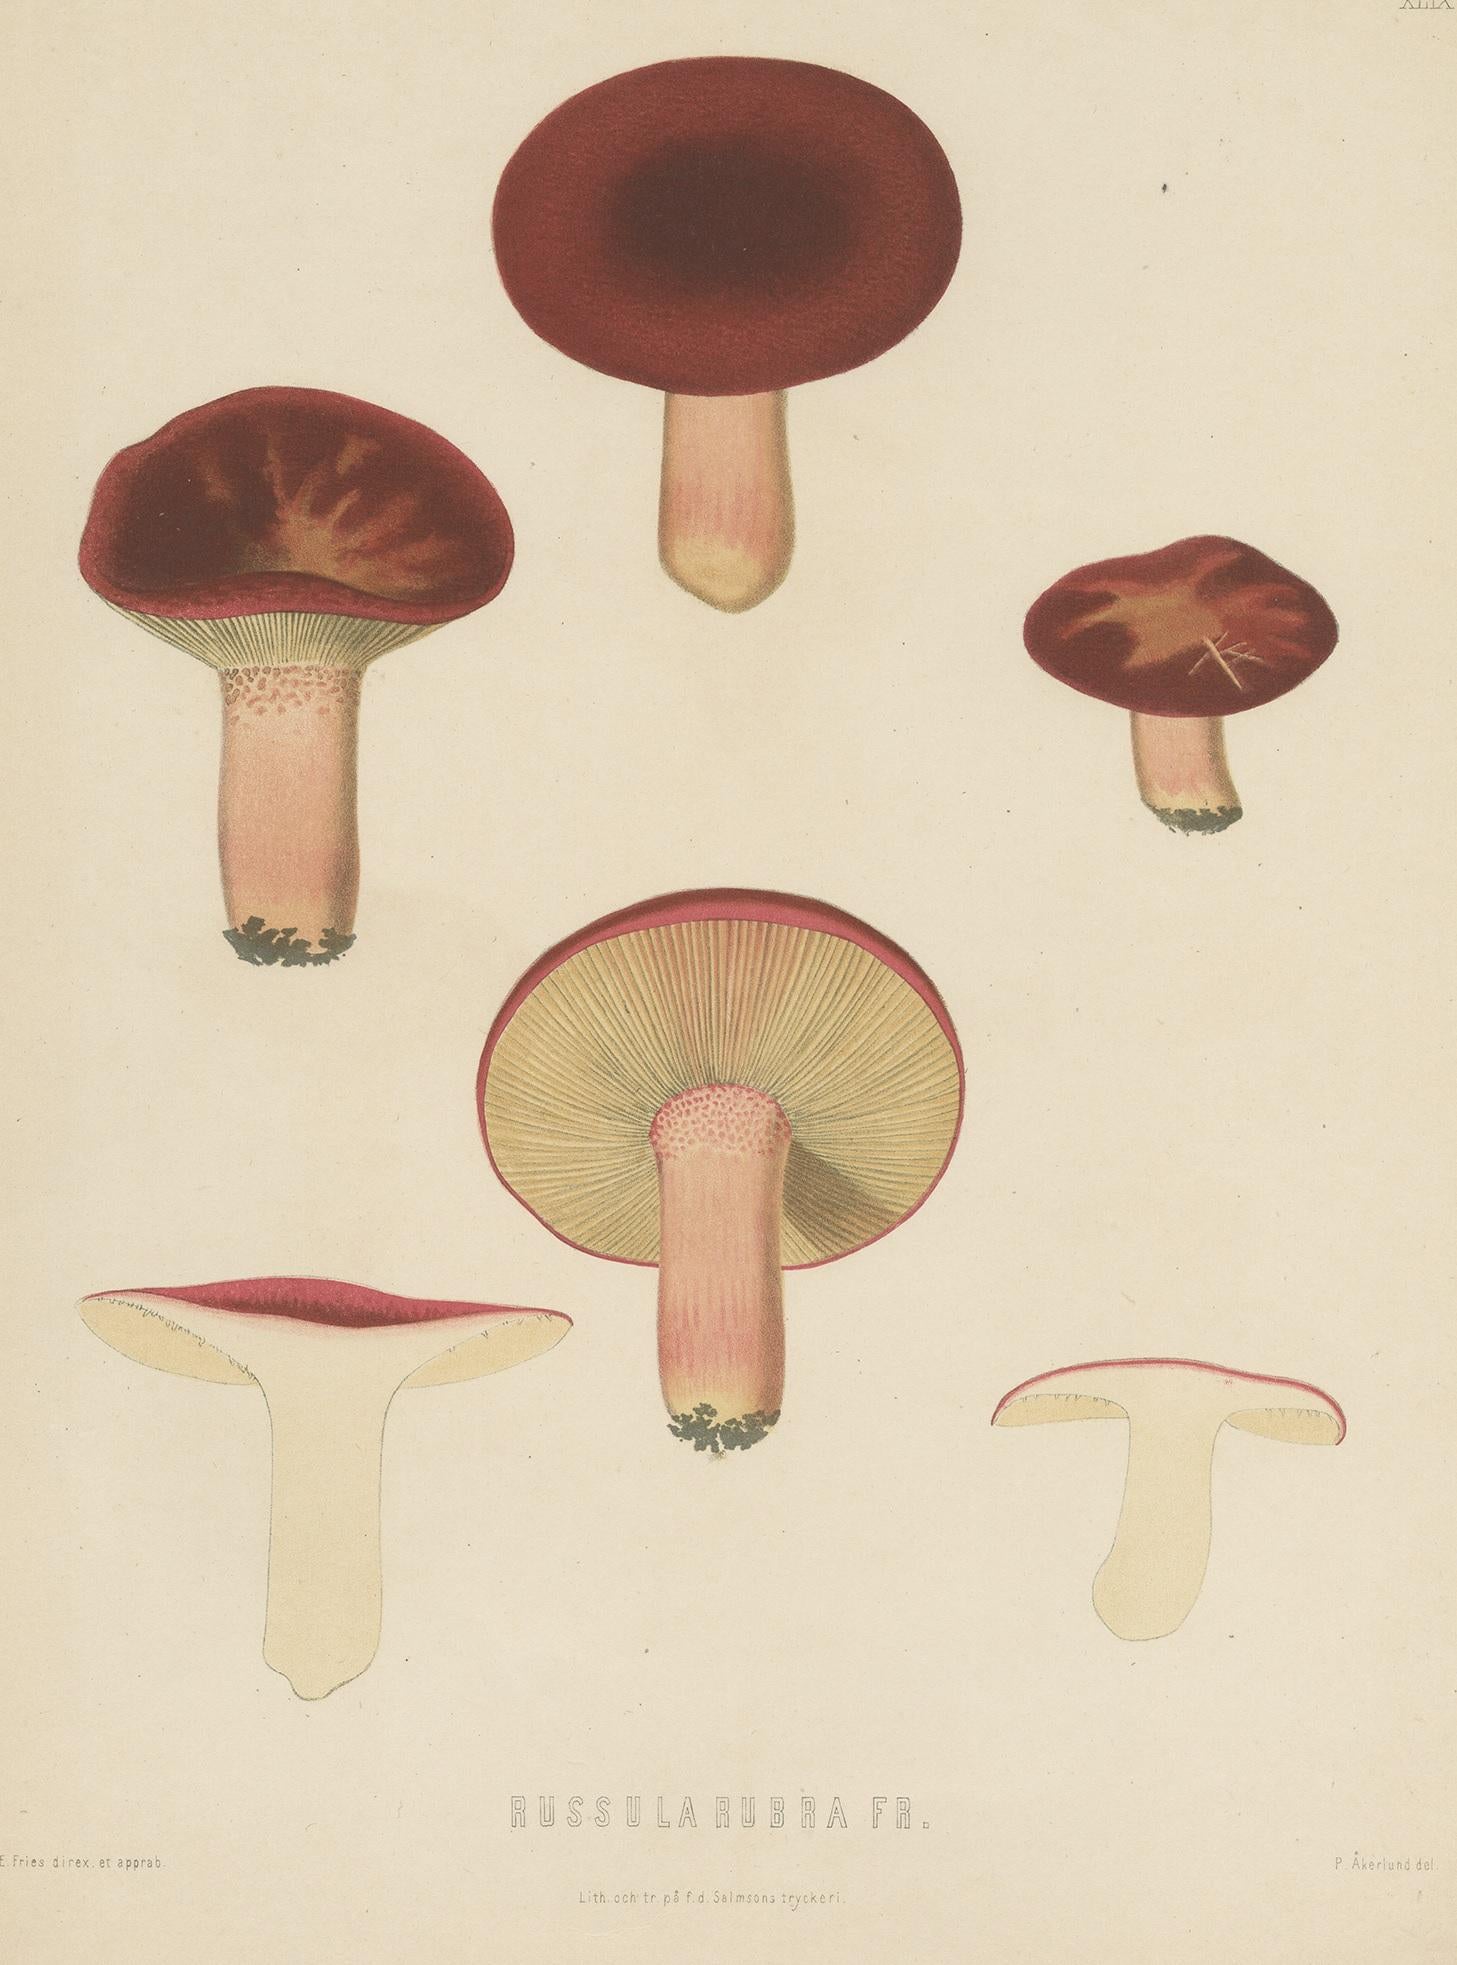 Antique mycology print titled 'Russula Rubra Fr.'. Russula emetica, commonly known as the sickener, emetic russula, or vomiting russula, is a basidiomycete mushroom, and the type species of the genus Russula.

This print originates from 'Sveriges